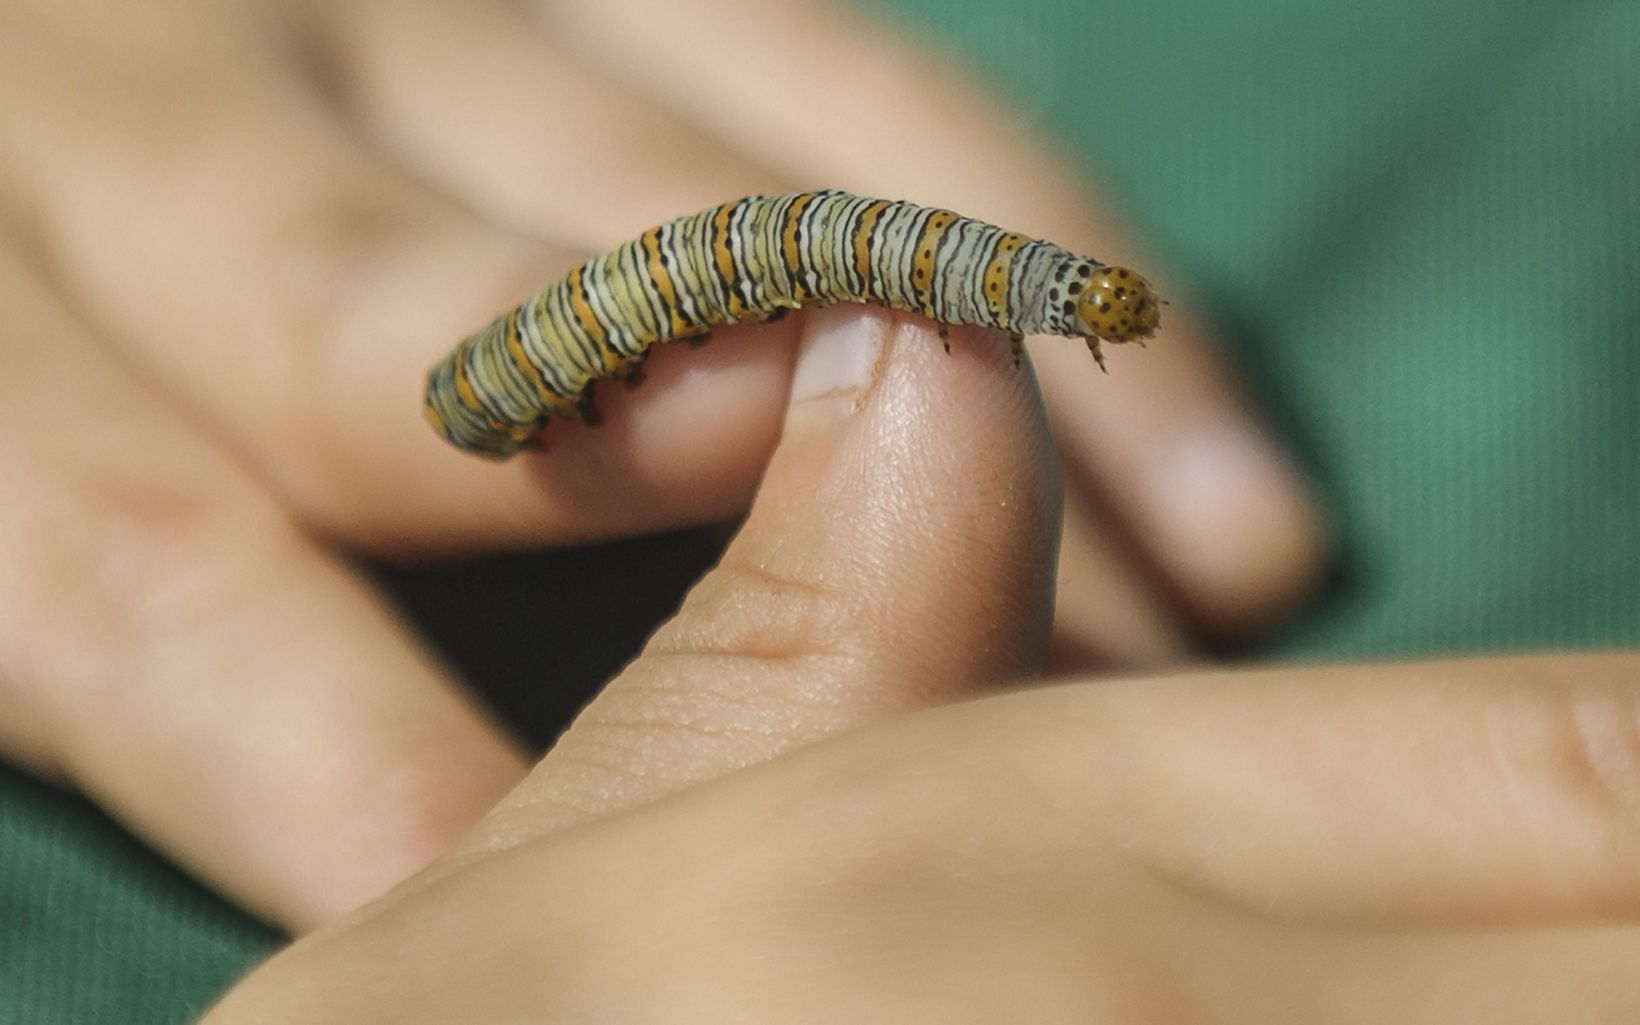 A yellow-and-white-striped caterpillar crawls on a hand.